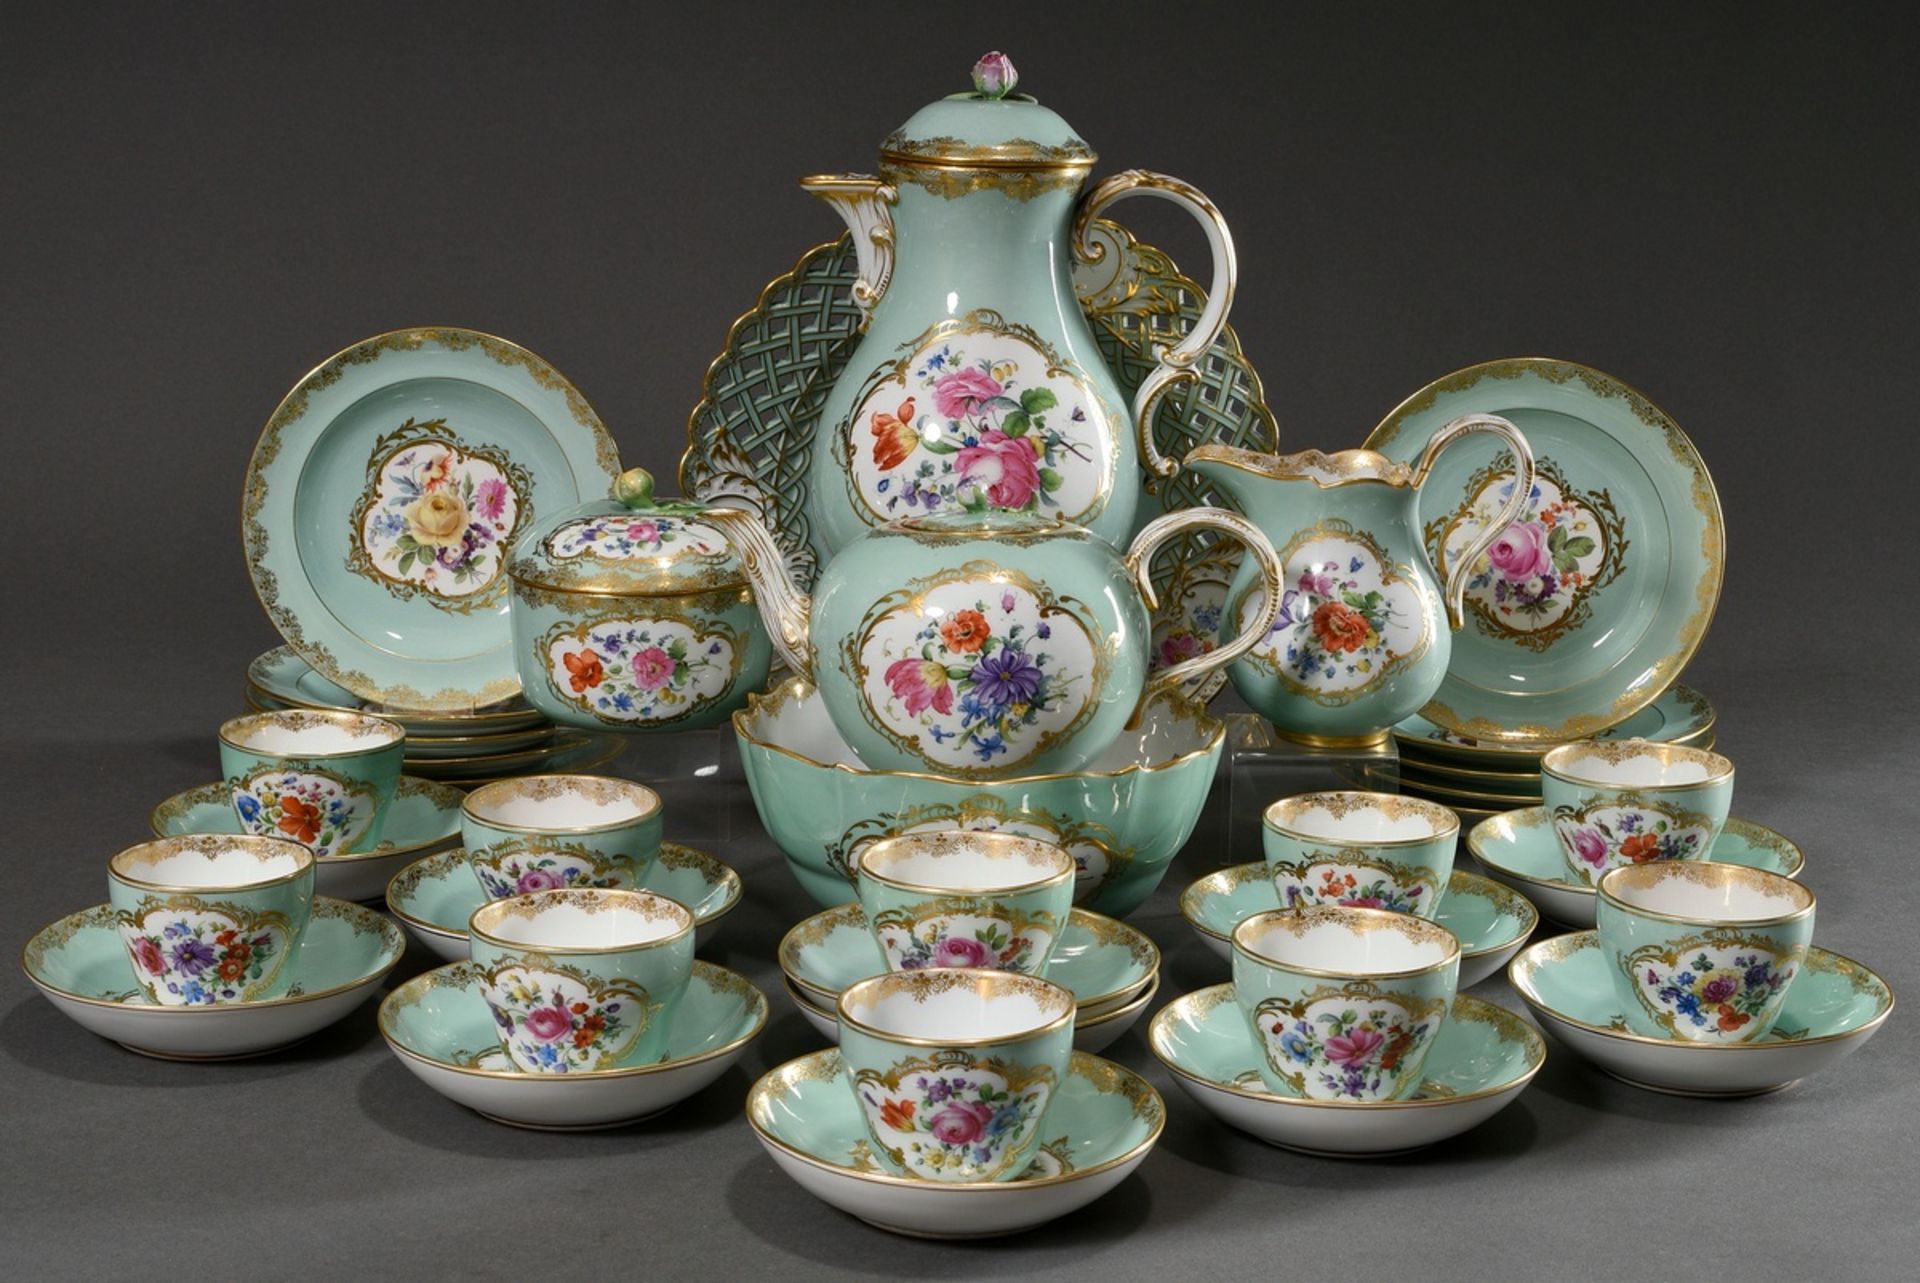 26 pieces Meissen state tea and coffee service for 10 persons with polychrome floral painting in go - Image 2 of 7